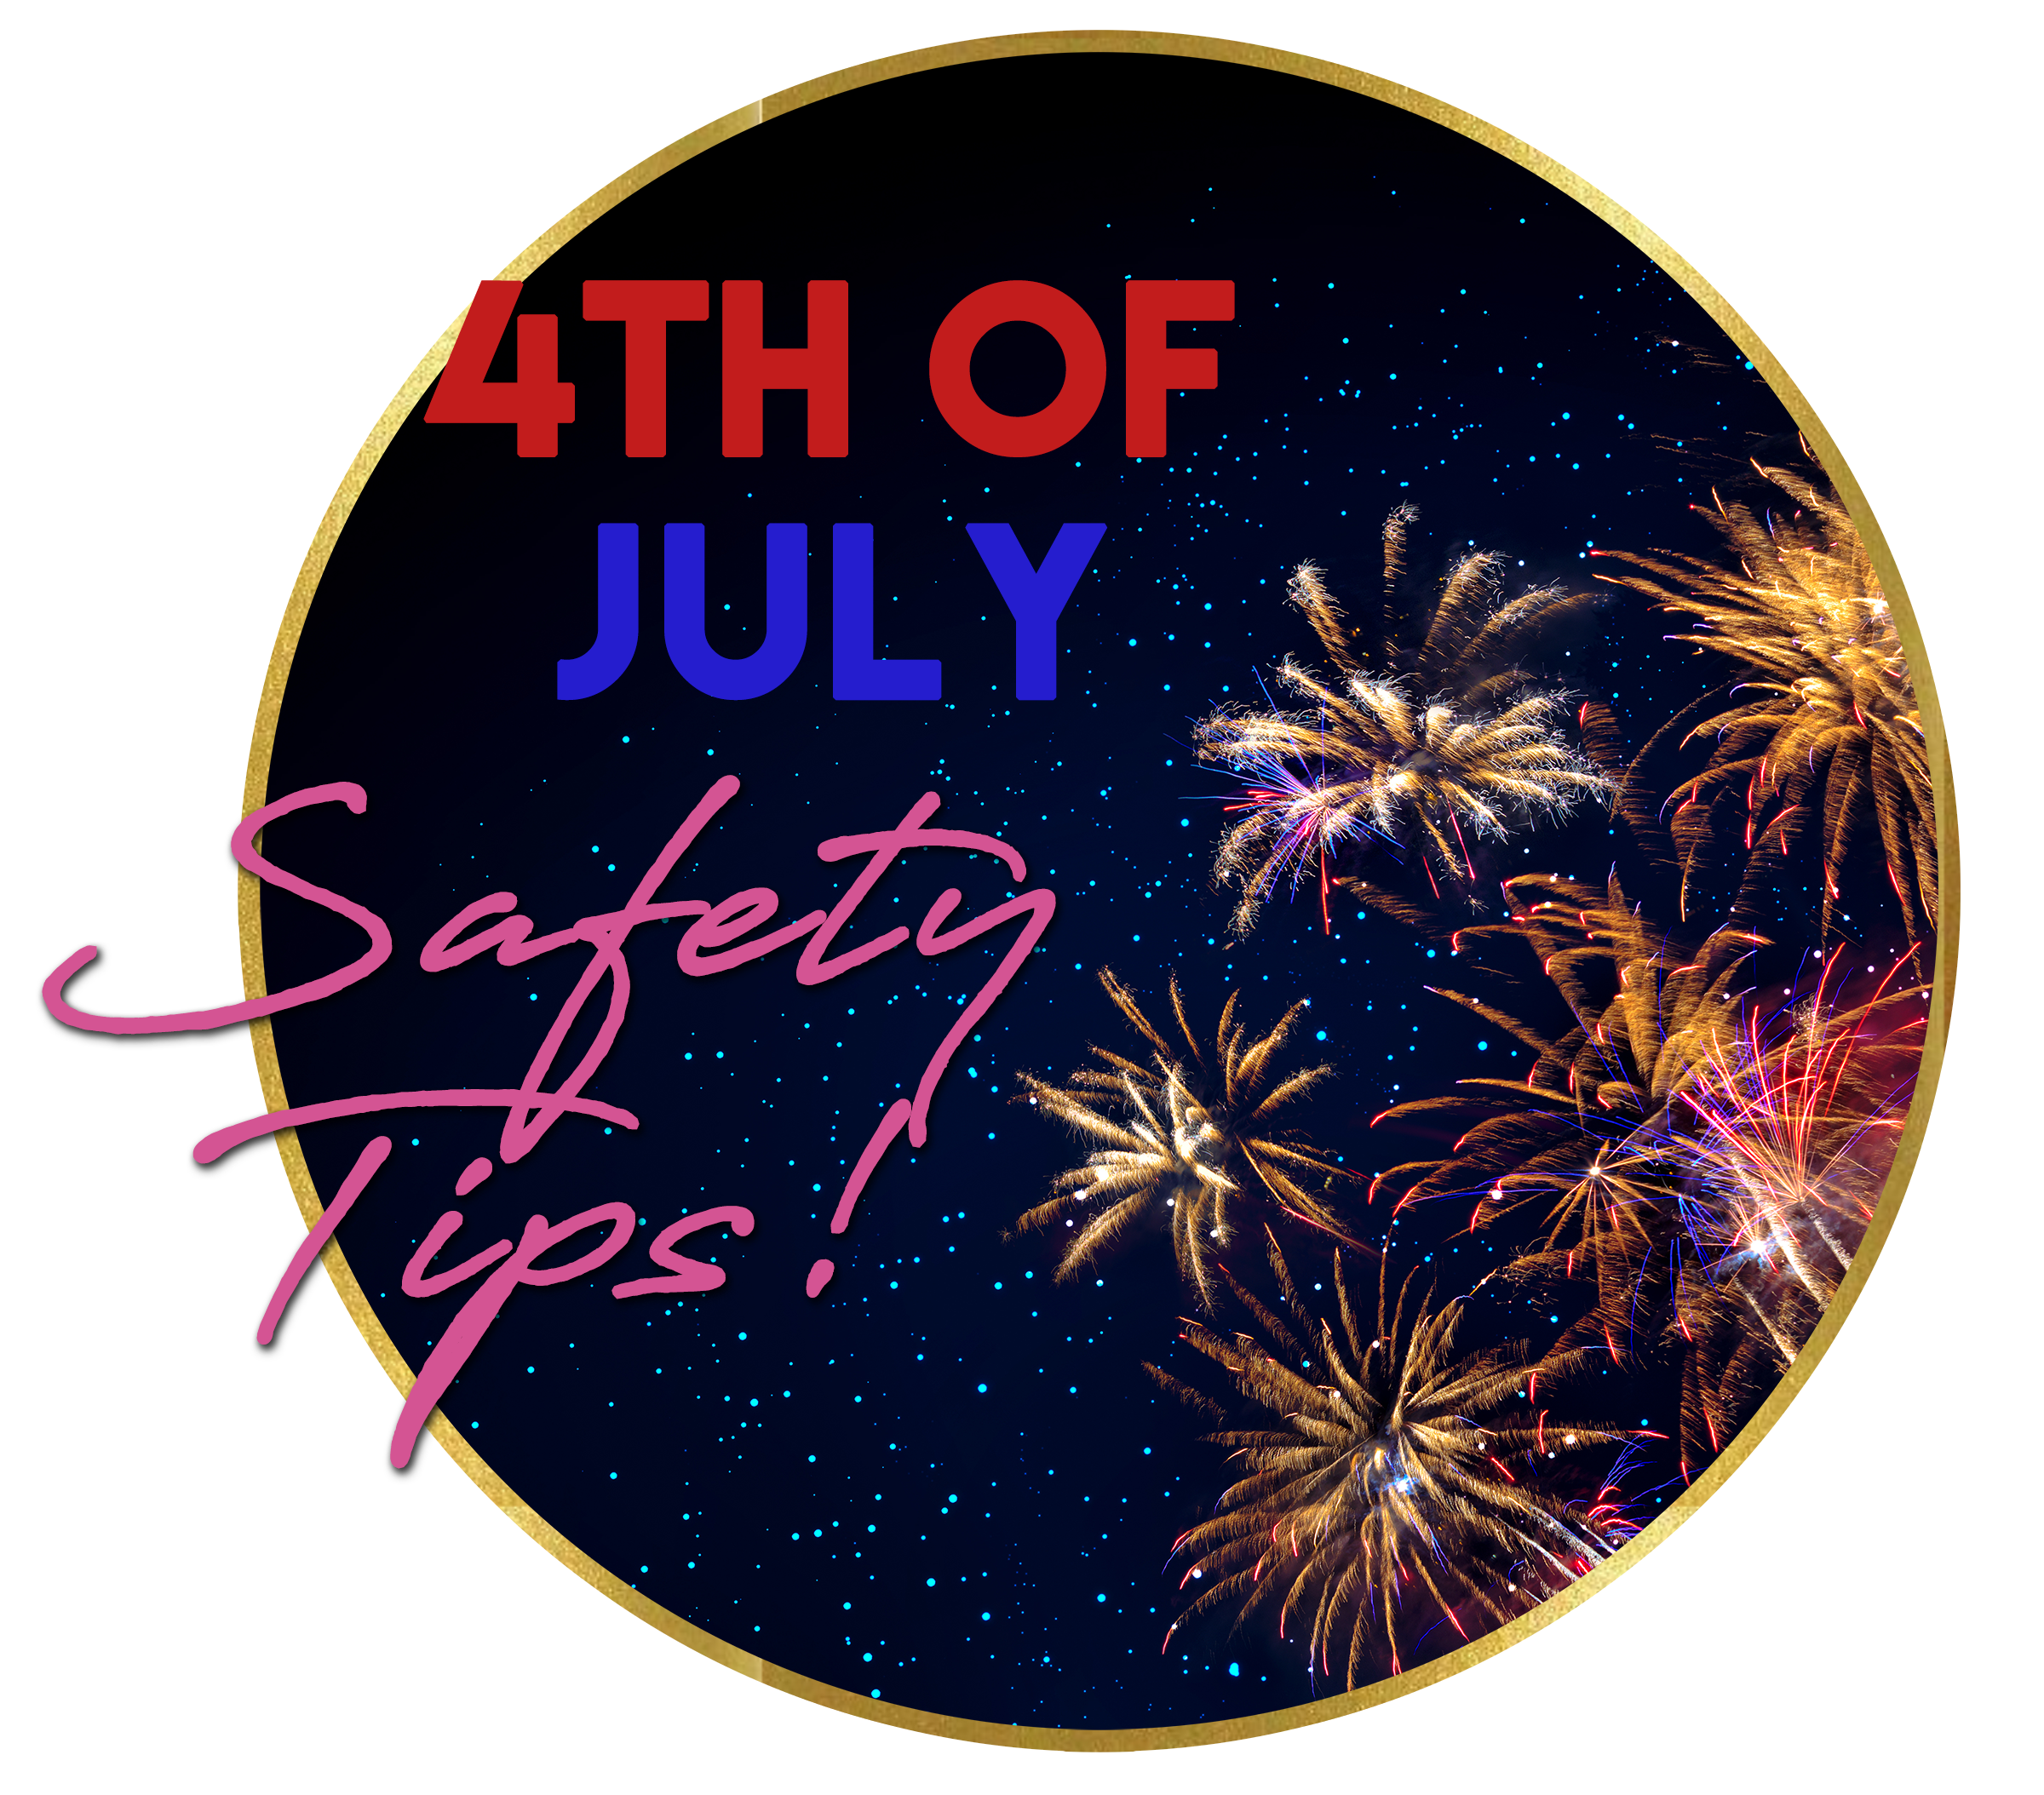 4th of July Safety tips from GlitterStarz